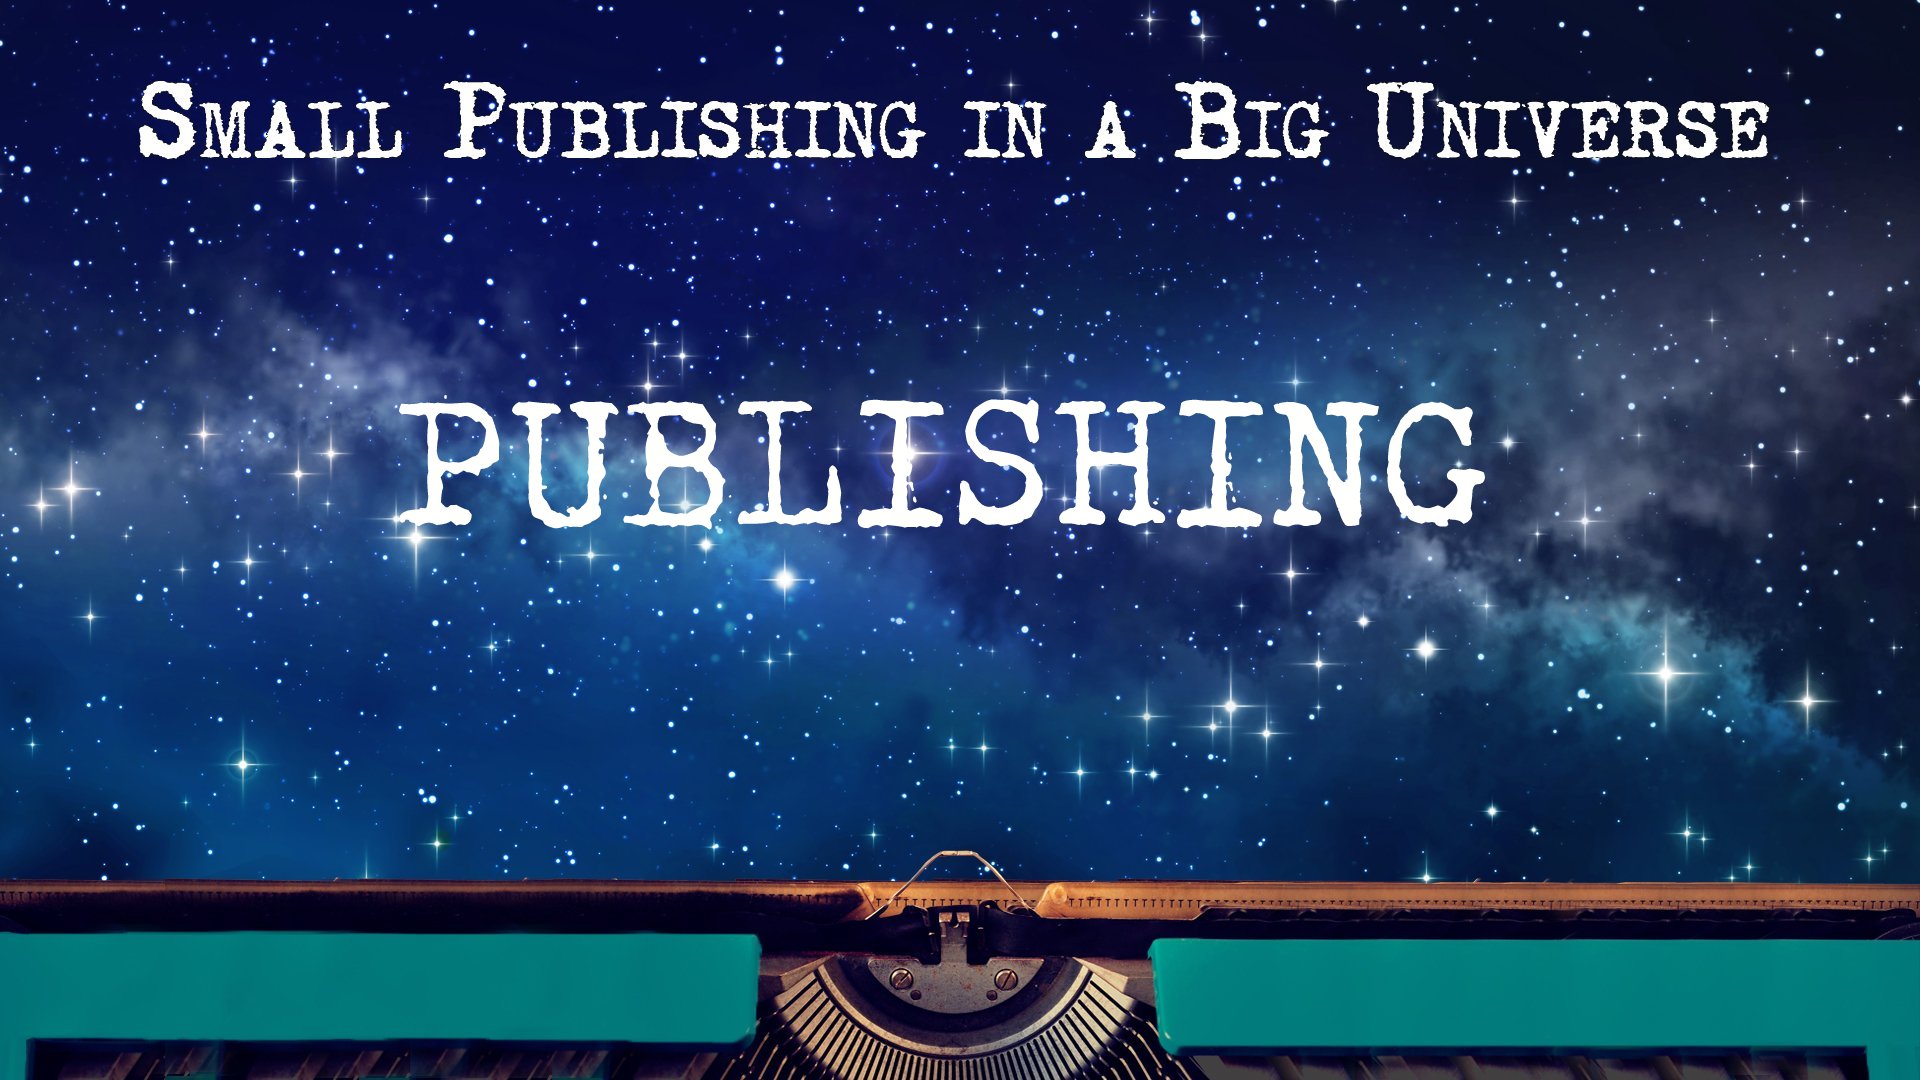 Small Publishing in a Big Universe